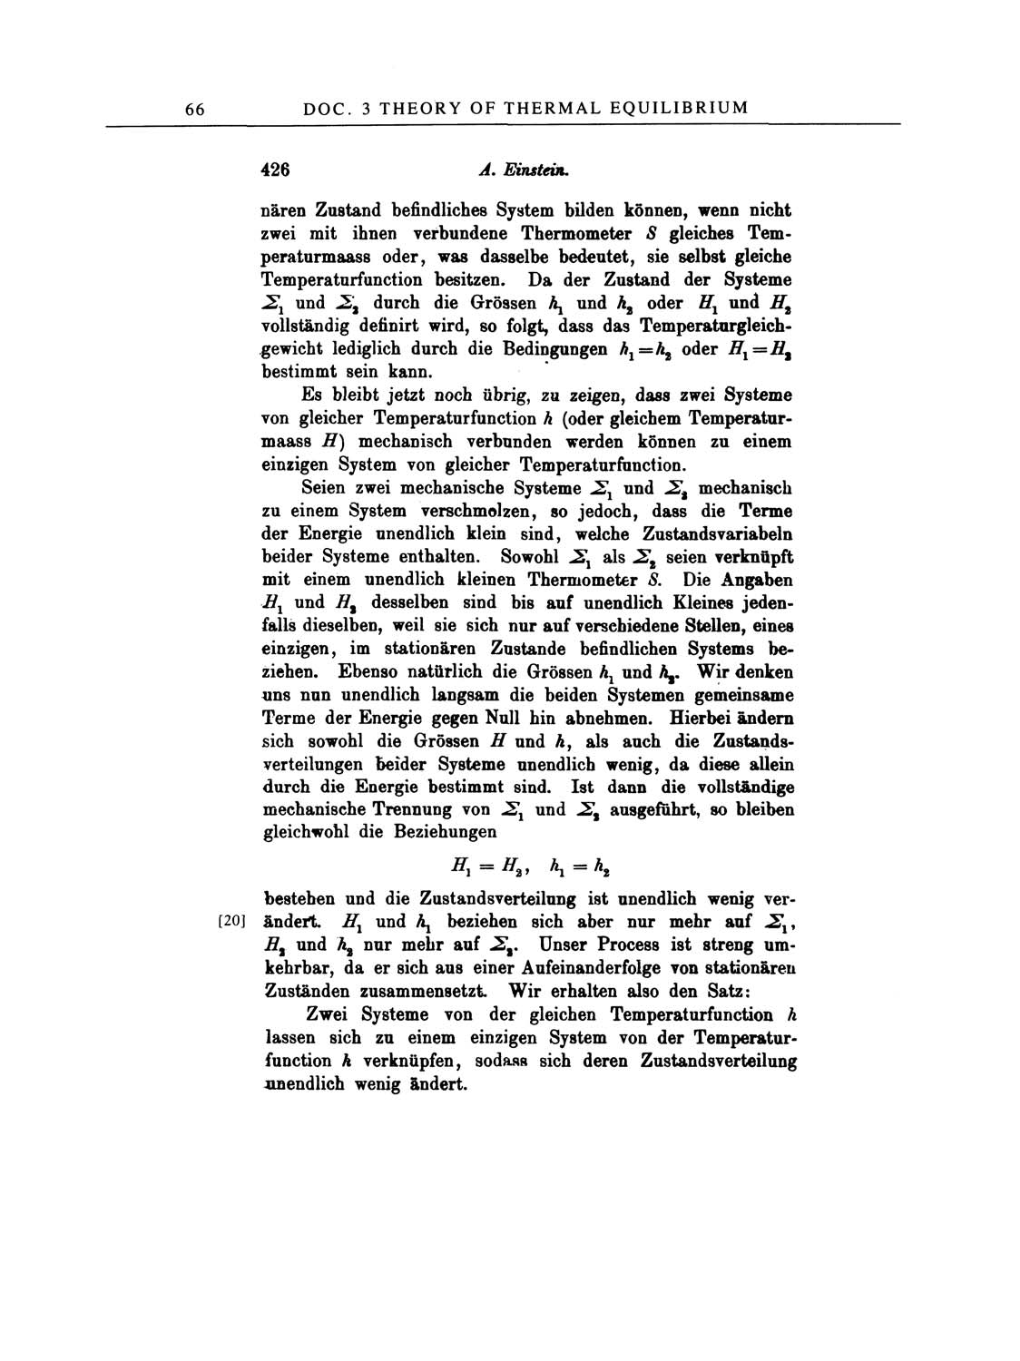 Volume 2: The Swiss Years: Writings, 1900-1909 page 66